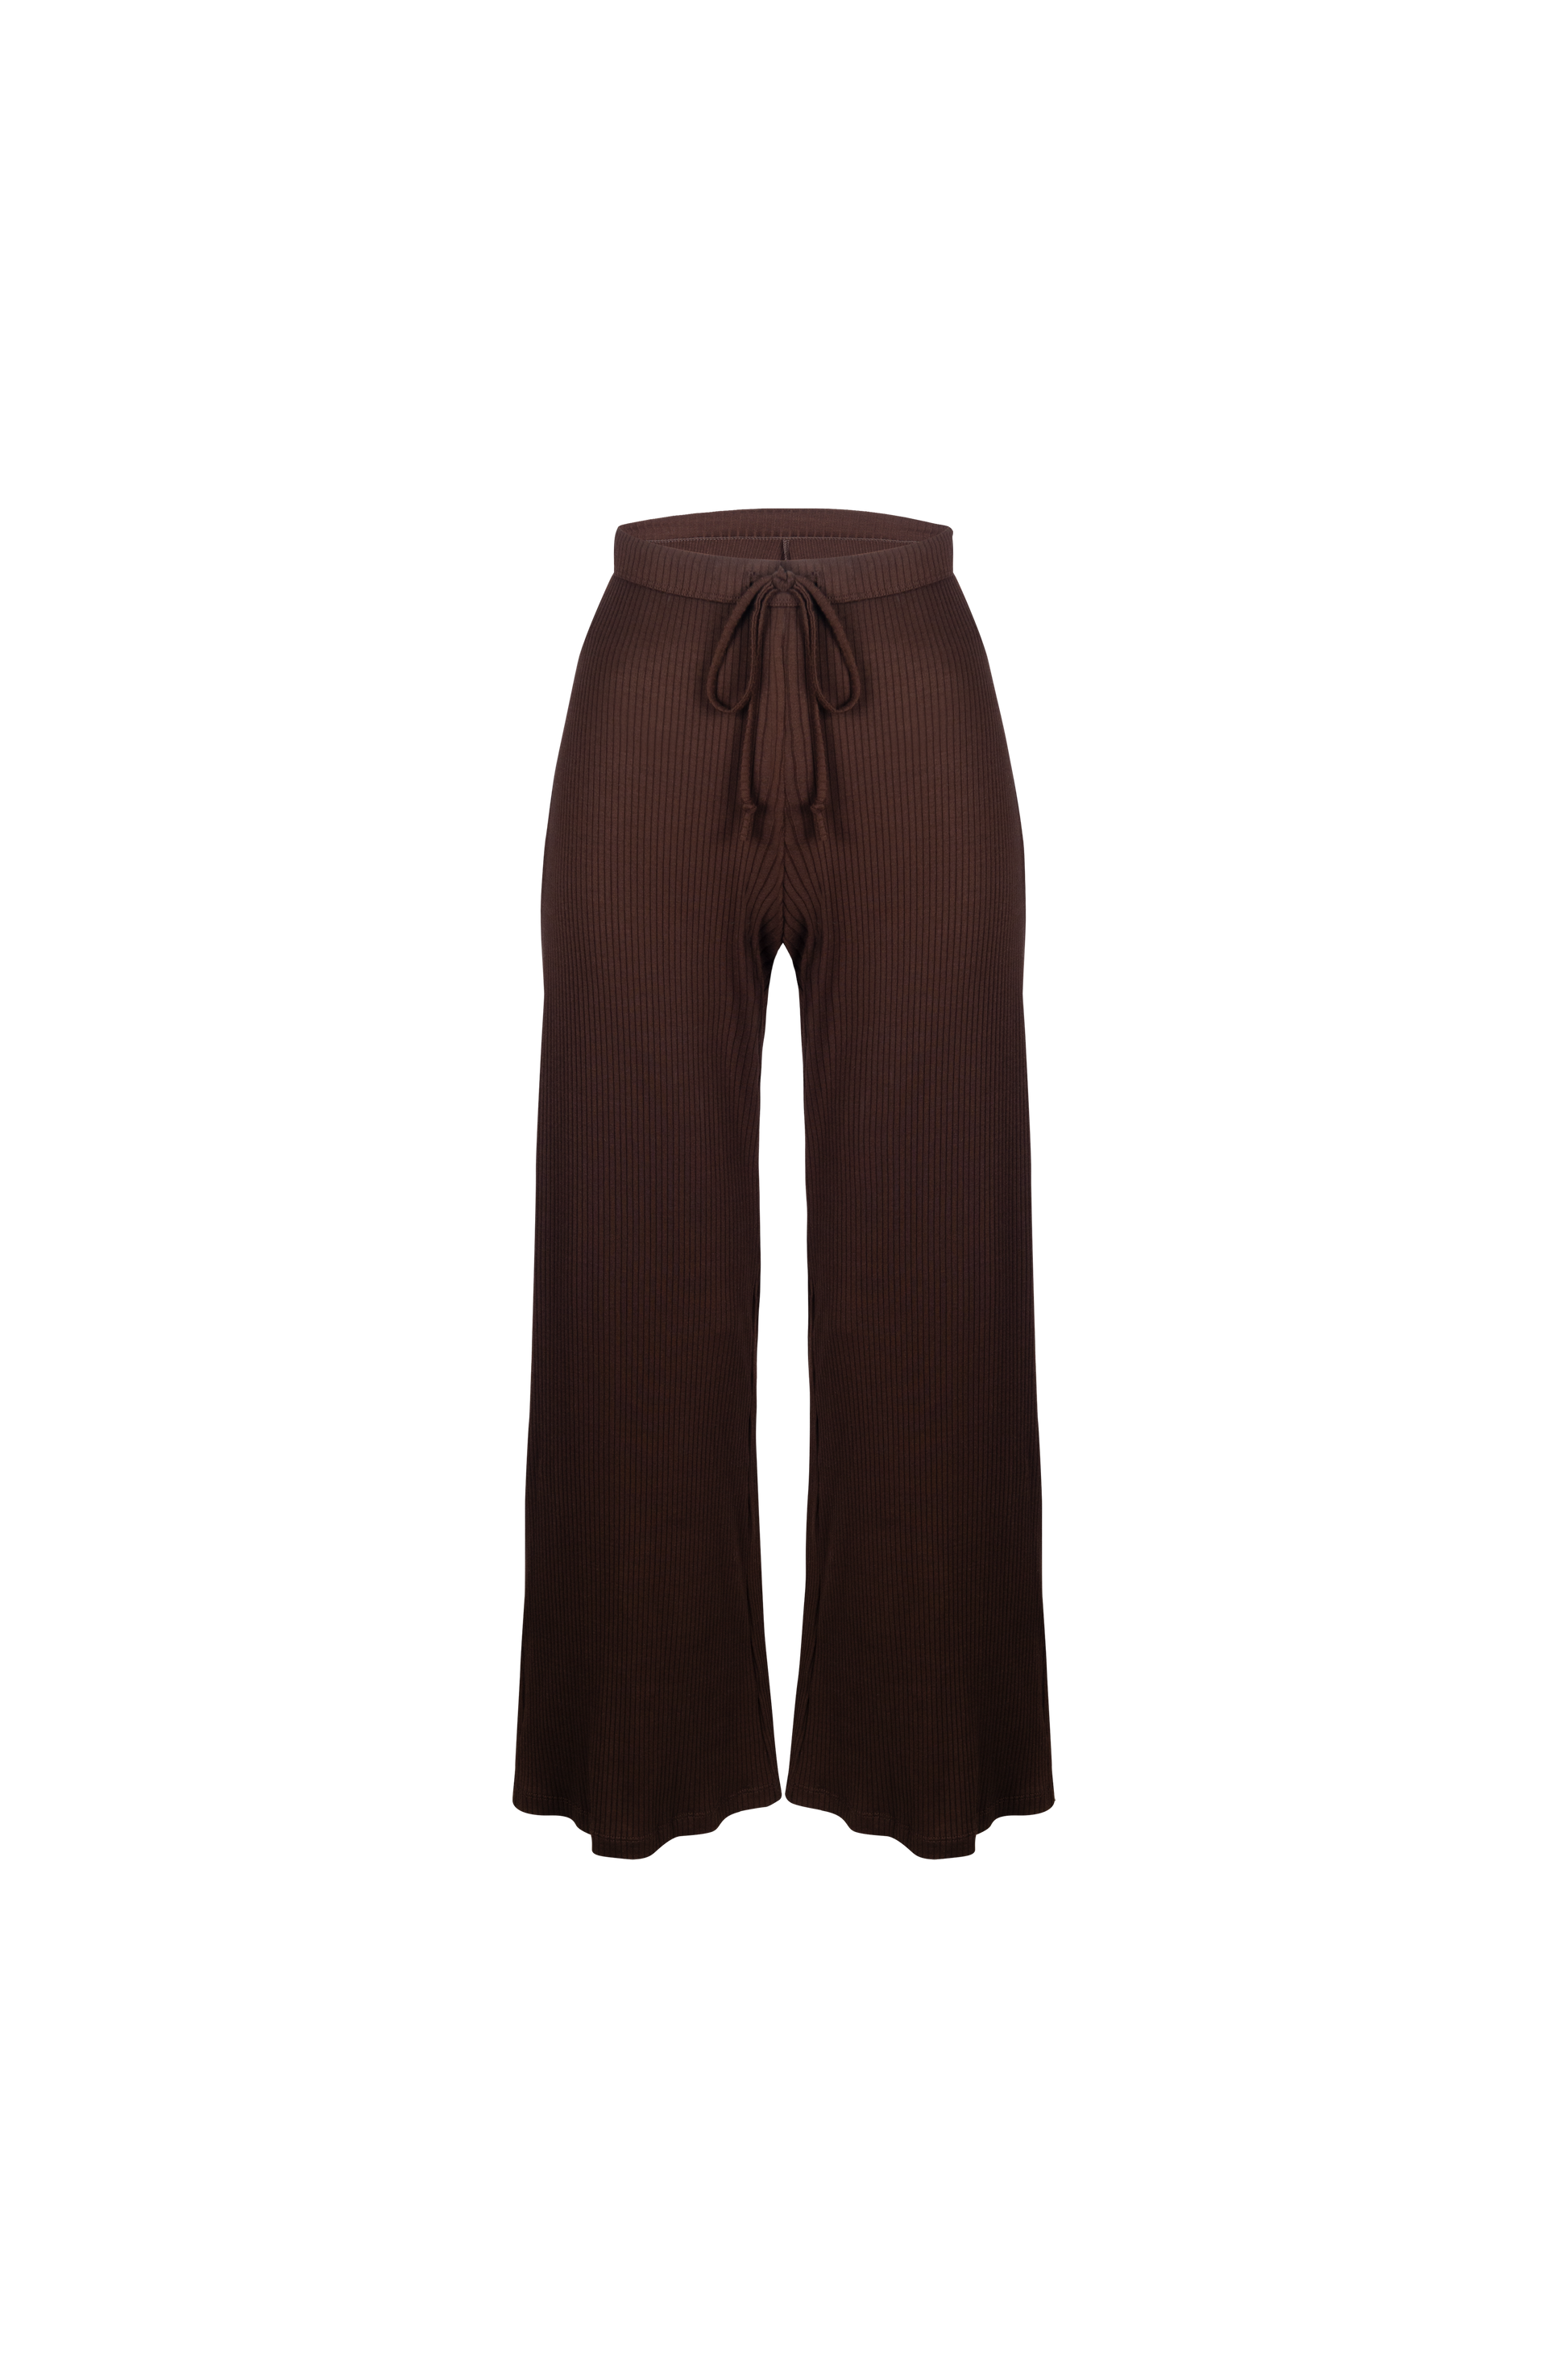 Luna Pants Choco - APPAREL THIS IS A LOVE SONG